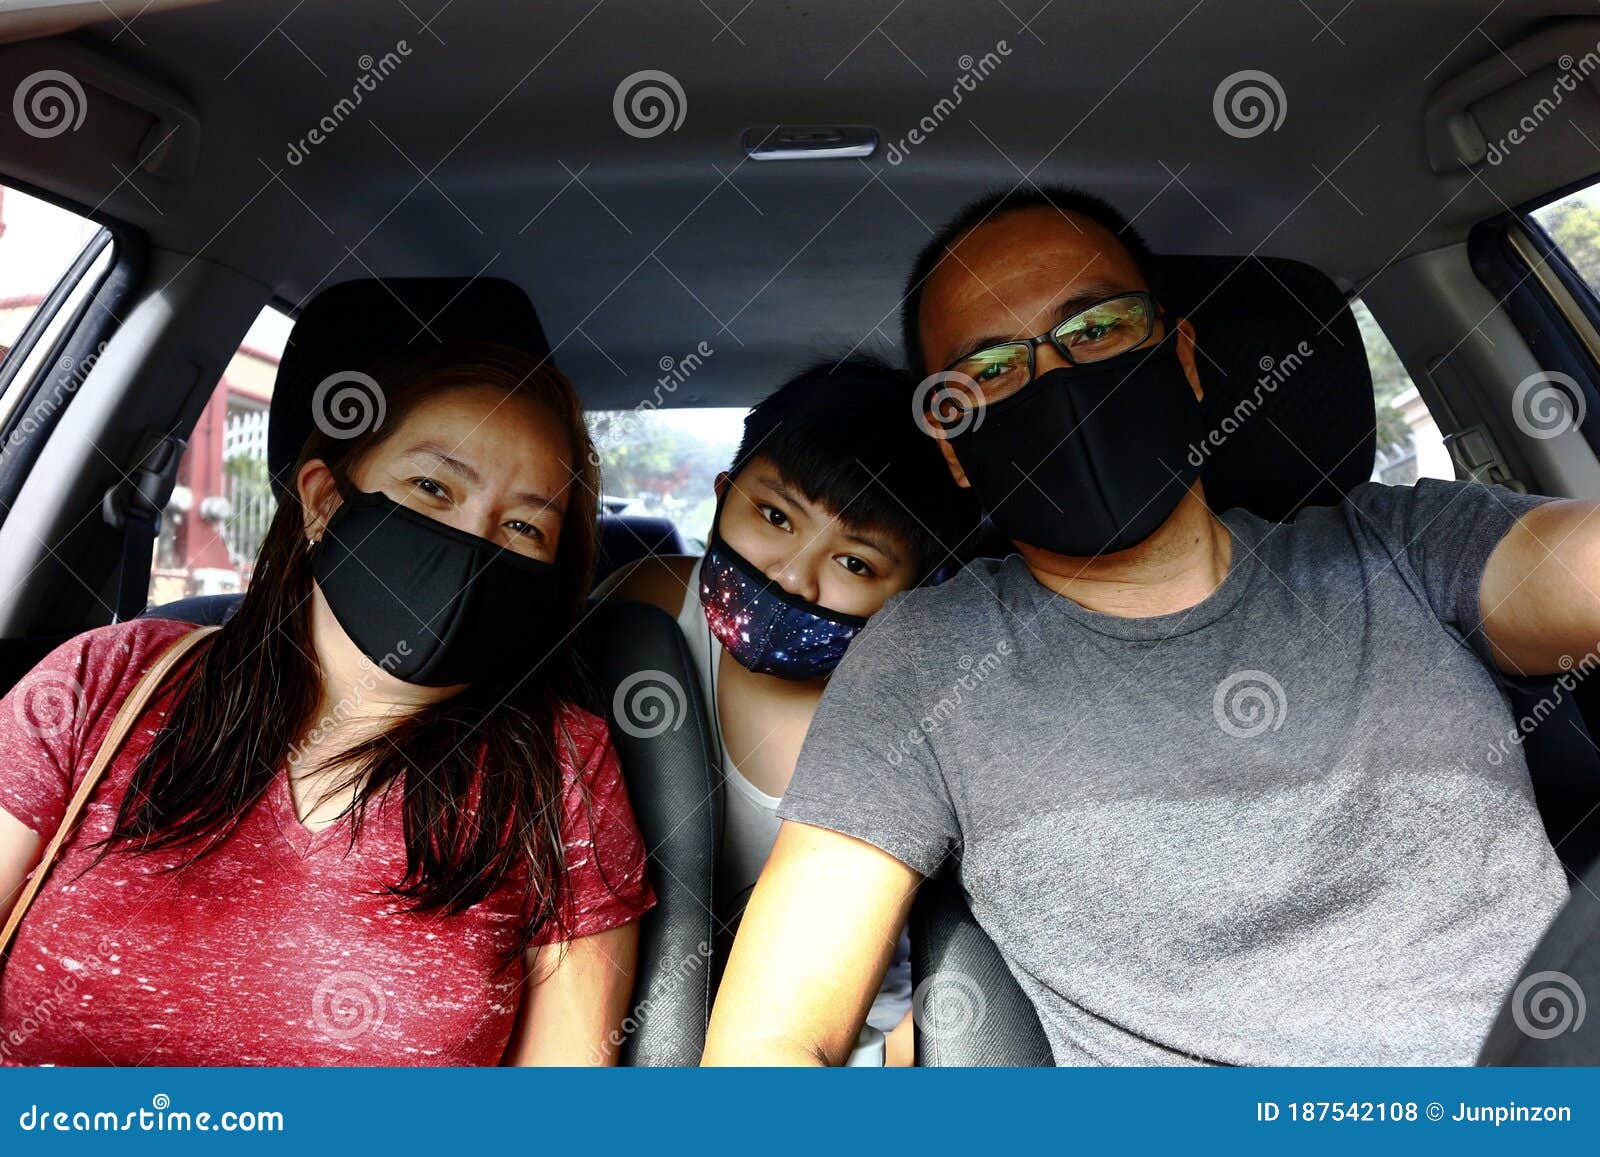 filipino family with face mask on while inside a car